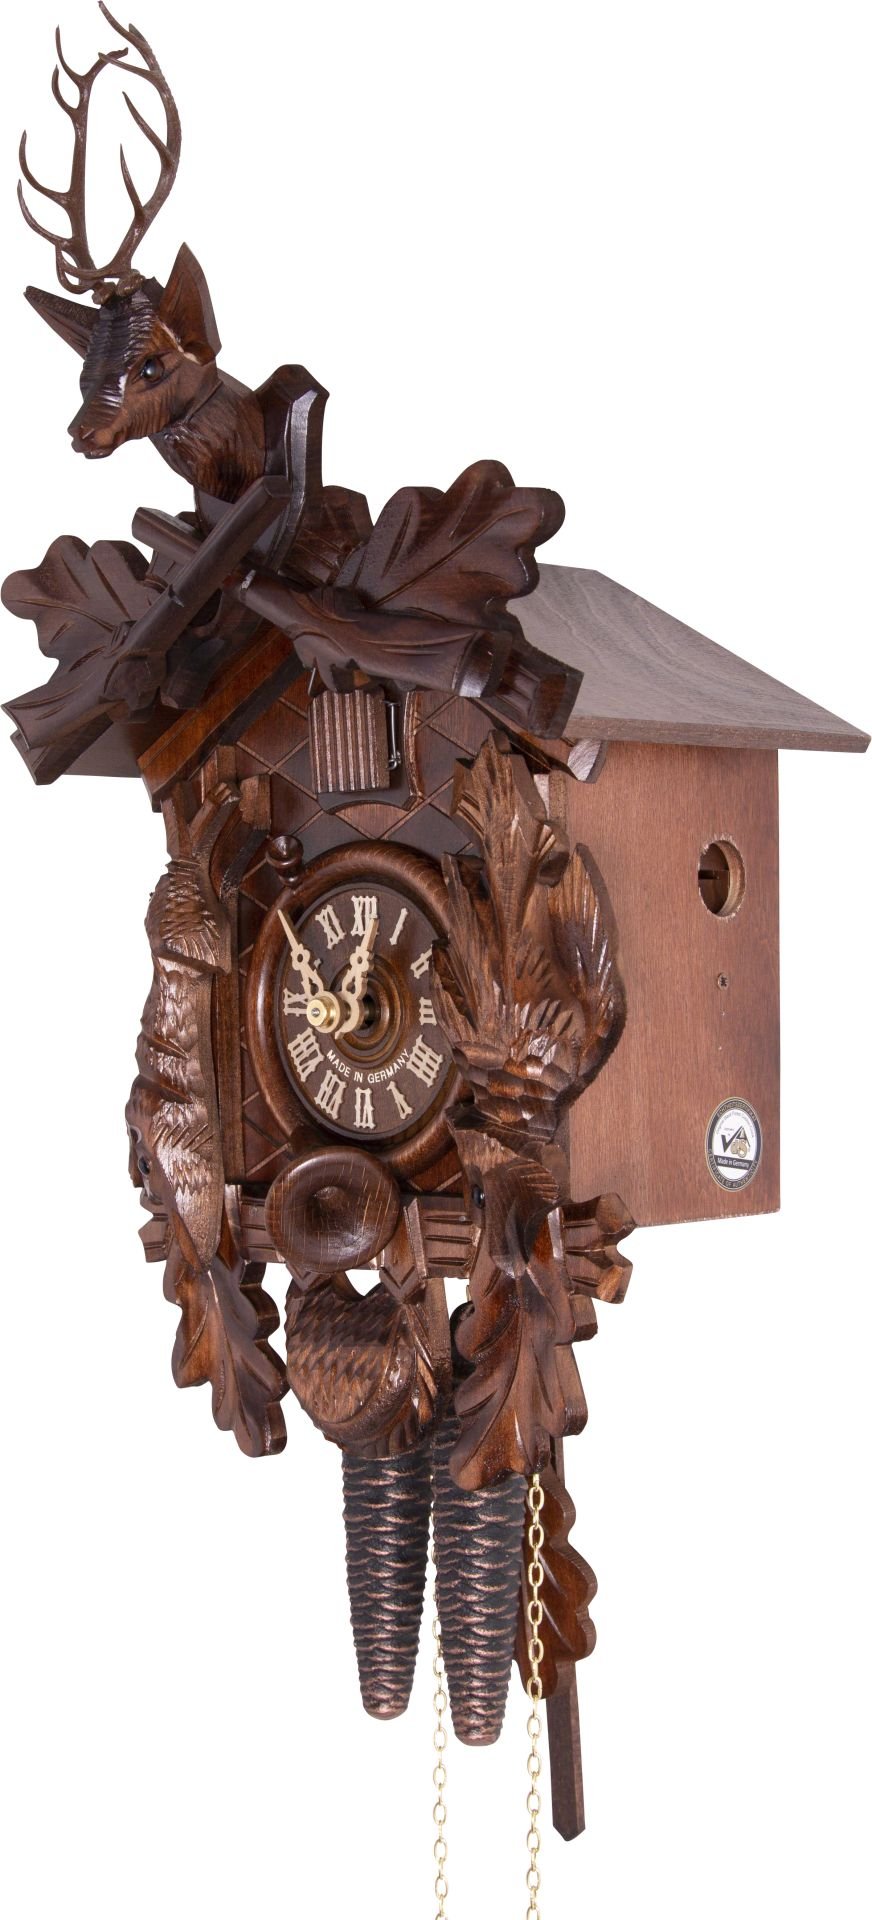 Cuckoo Clock Carved Style 1 Day Movement 38cm by Hekas